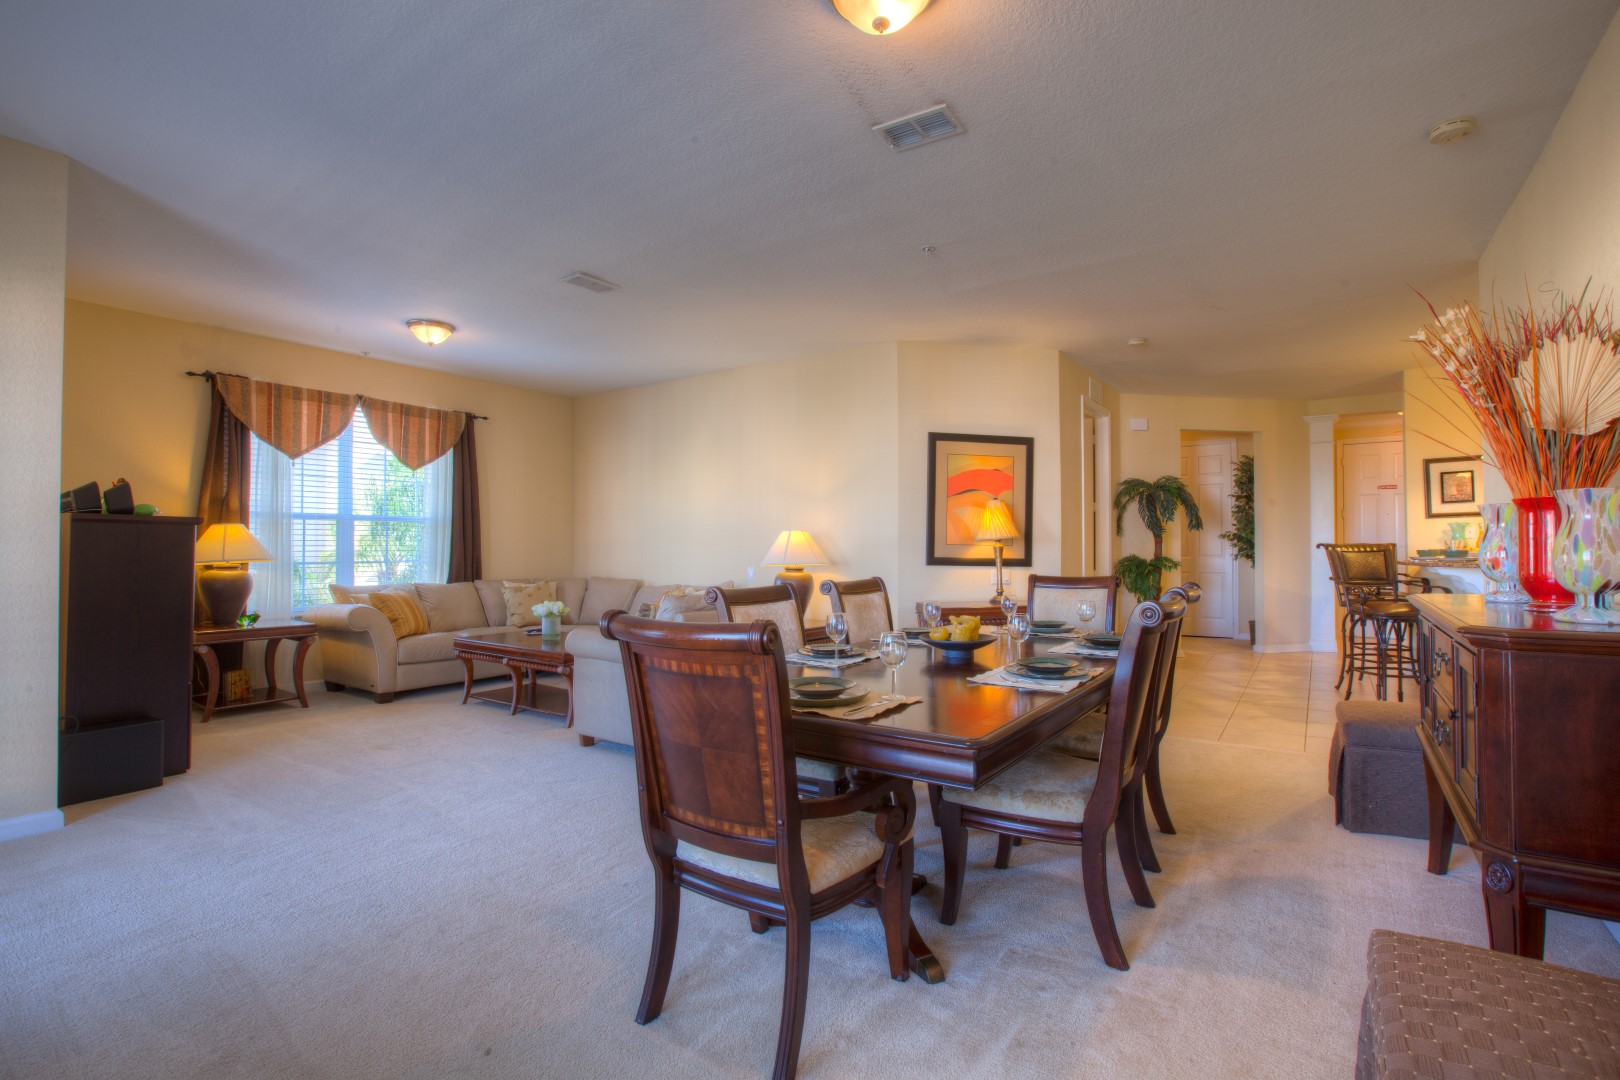 Gather, Dine, and Relax: Embrace the Warmth of our Welcoming Dining and Living Area Adorned with Wooden Furnishings.